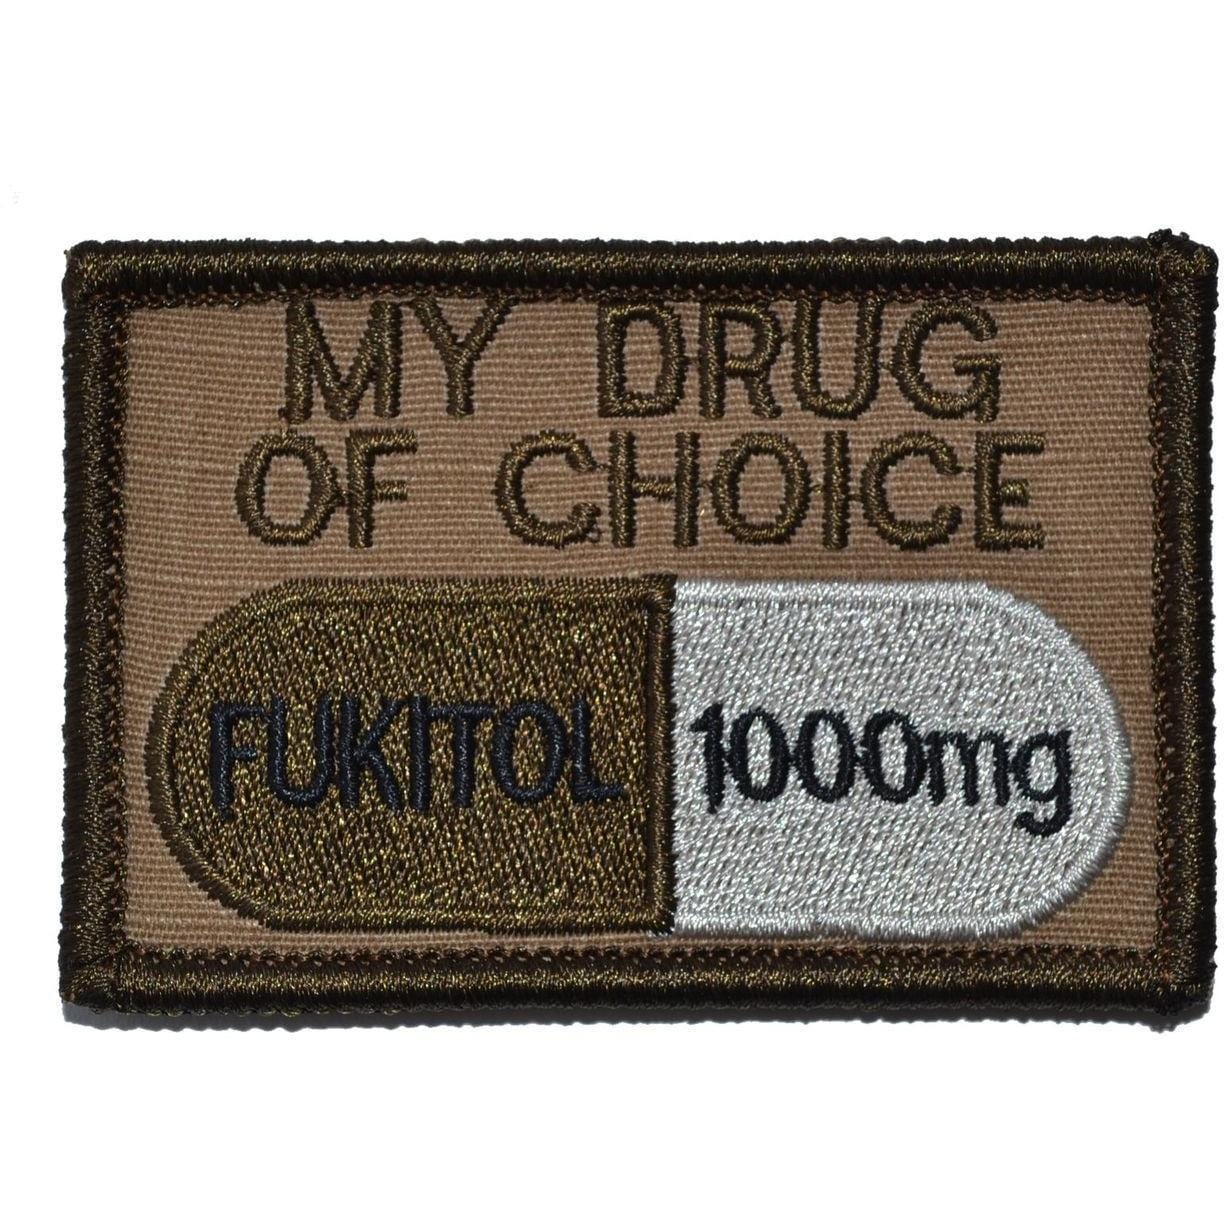 Tactical Gear Junkie Patches Coyote Brown Fukitol, My Drug of Choice - 2x3 Patch